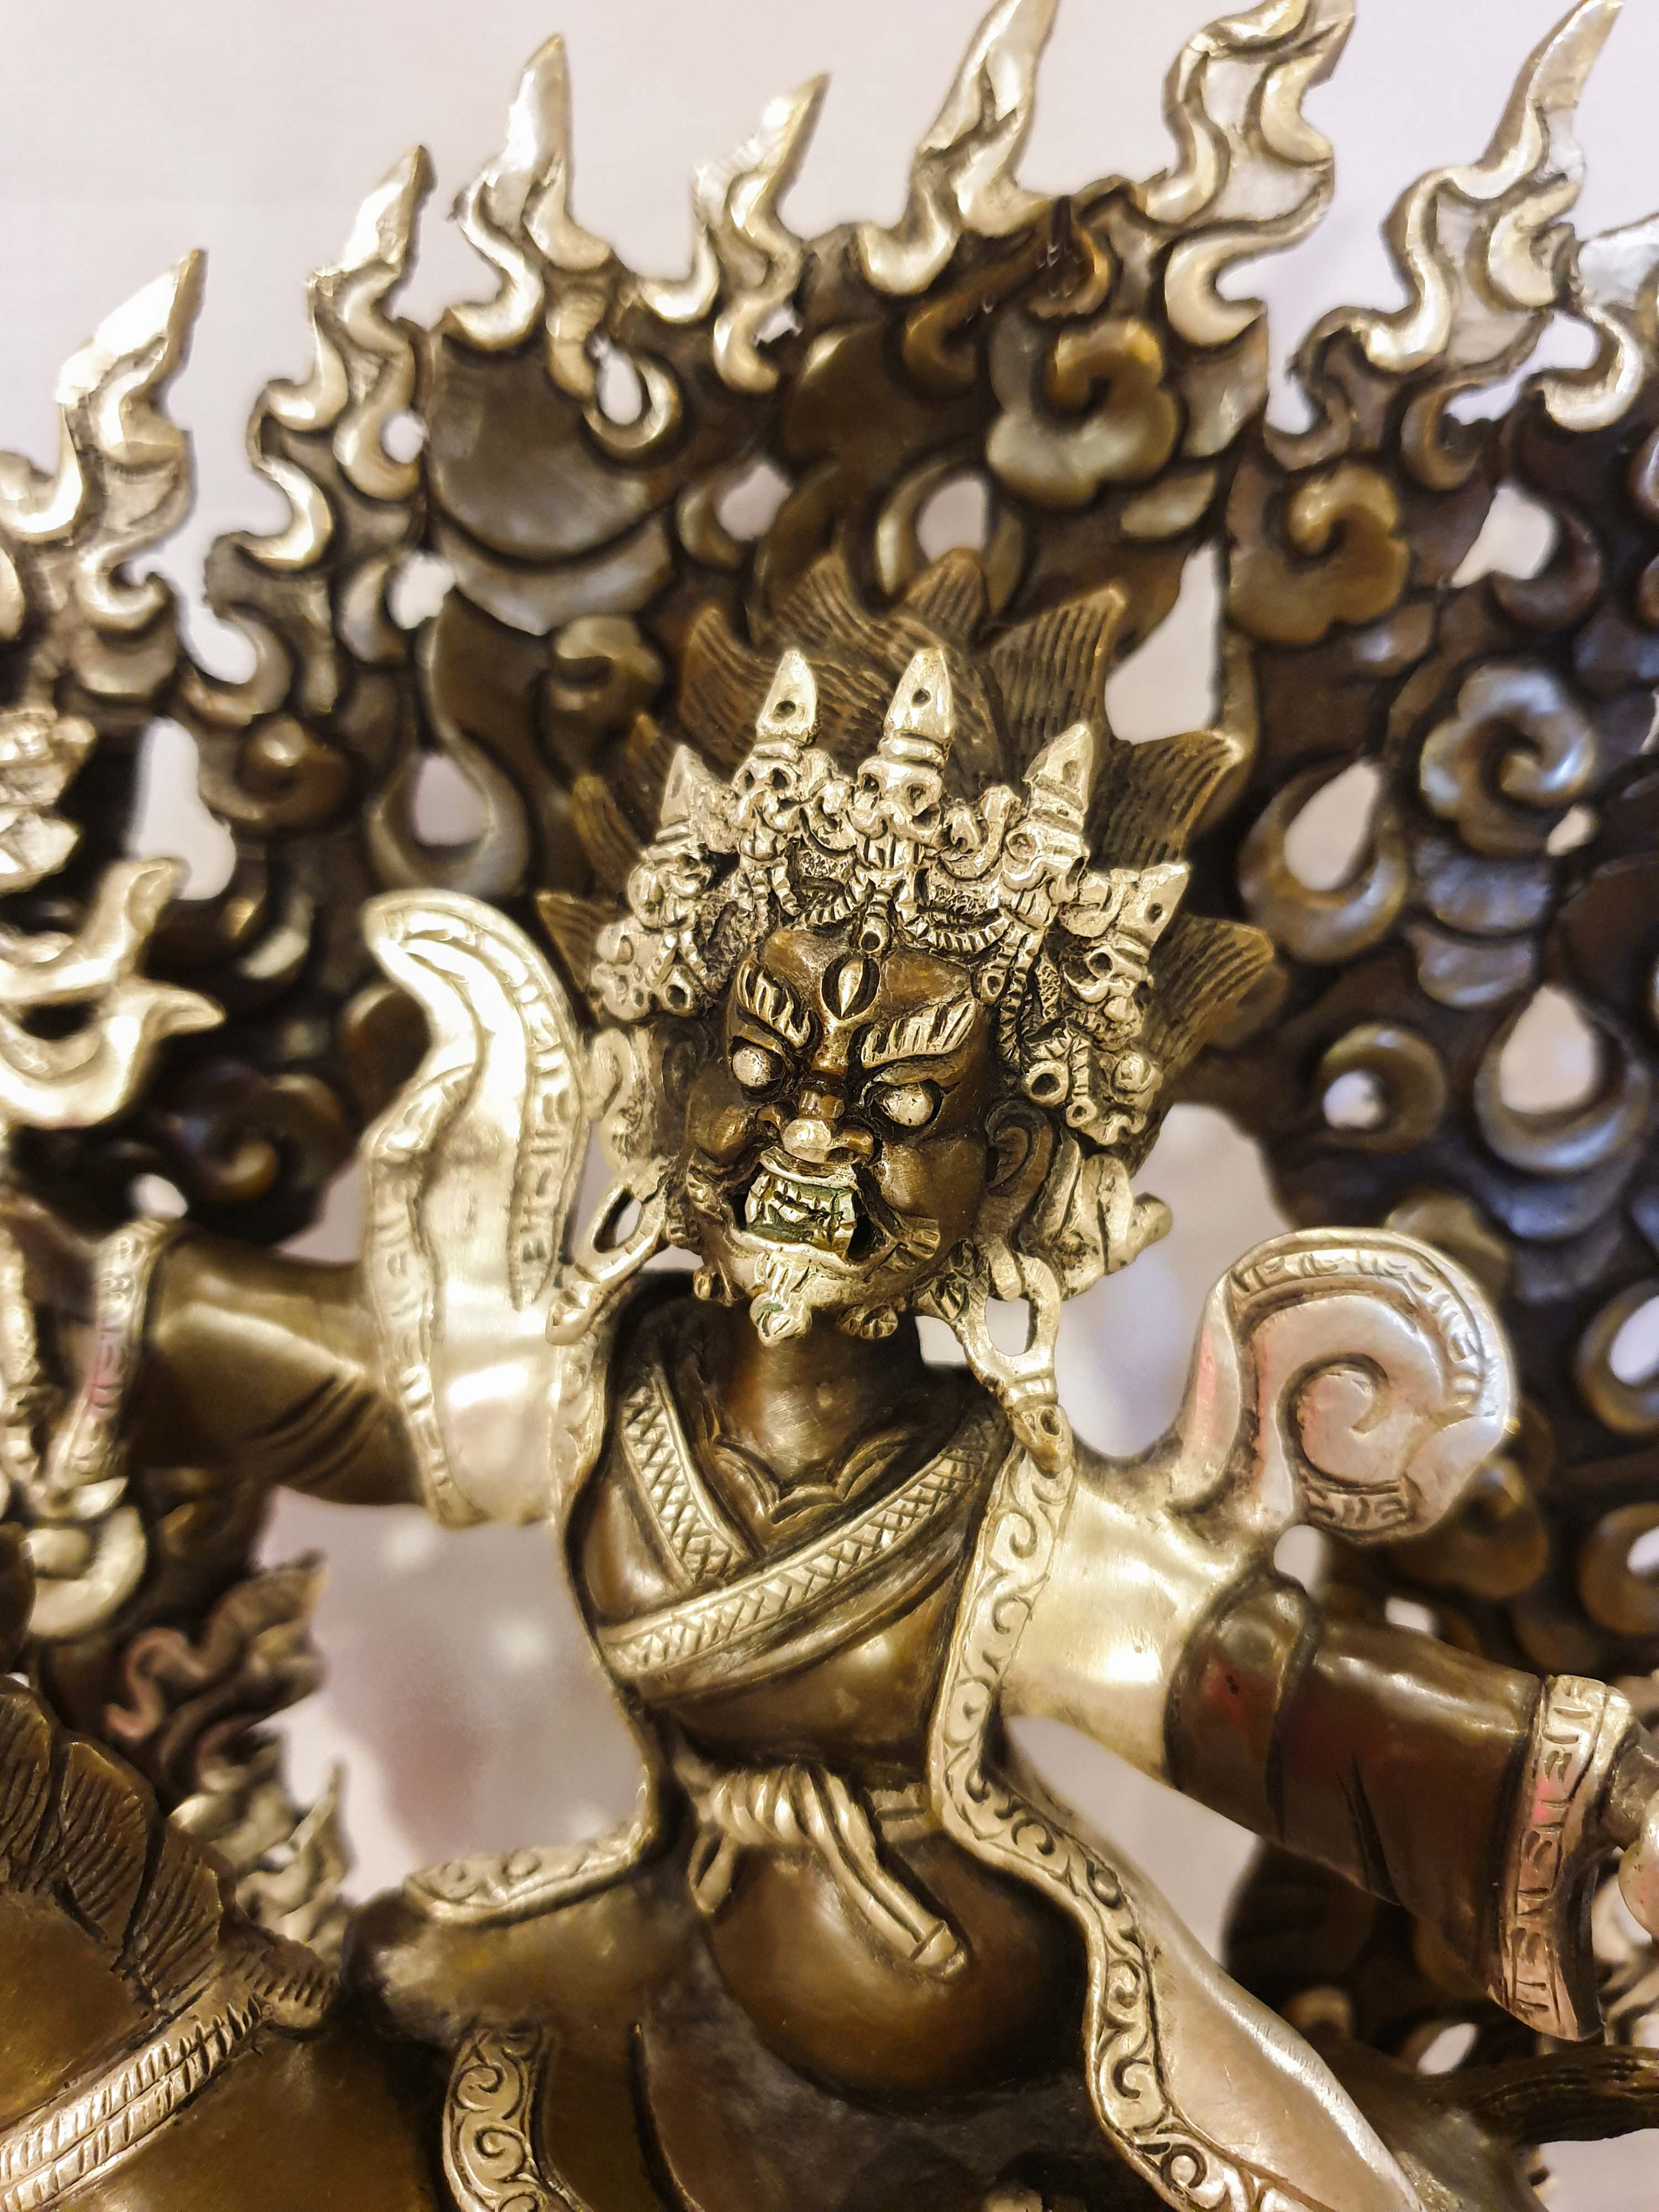 Buddhist Statue Of Tibetan Protector Deities, silver And Chocolate Oxidized